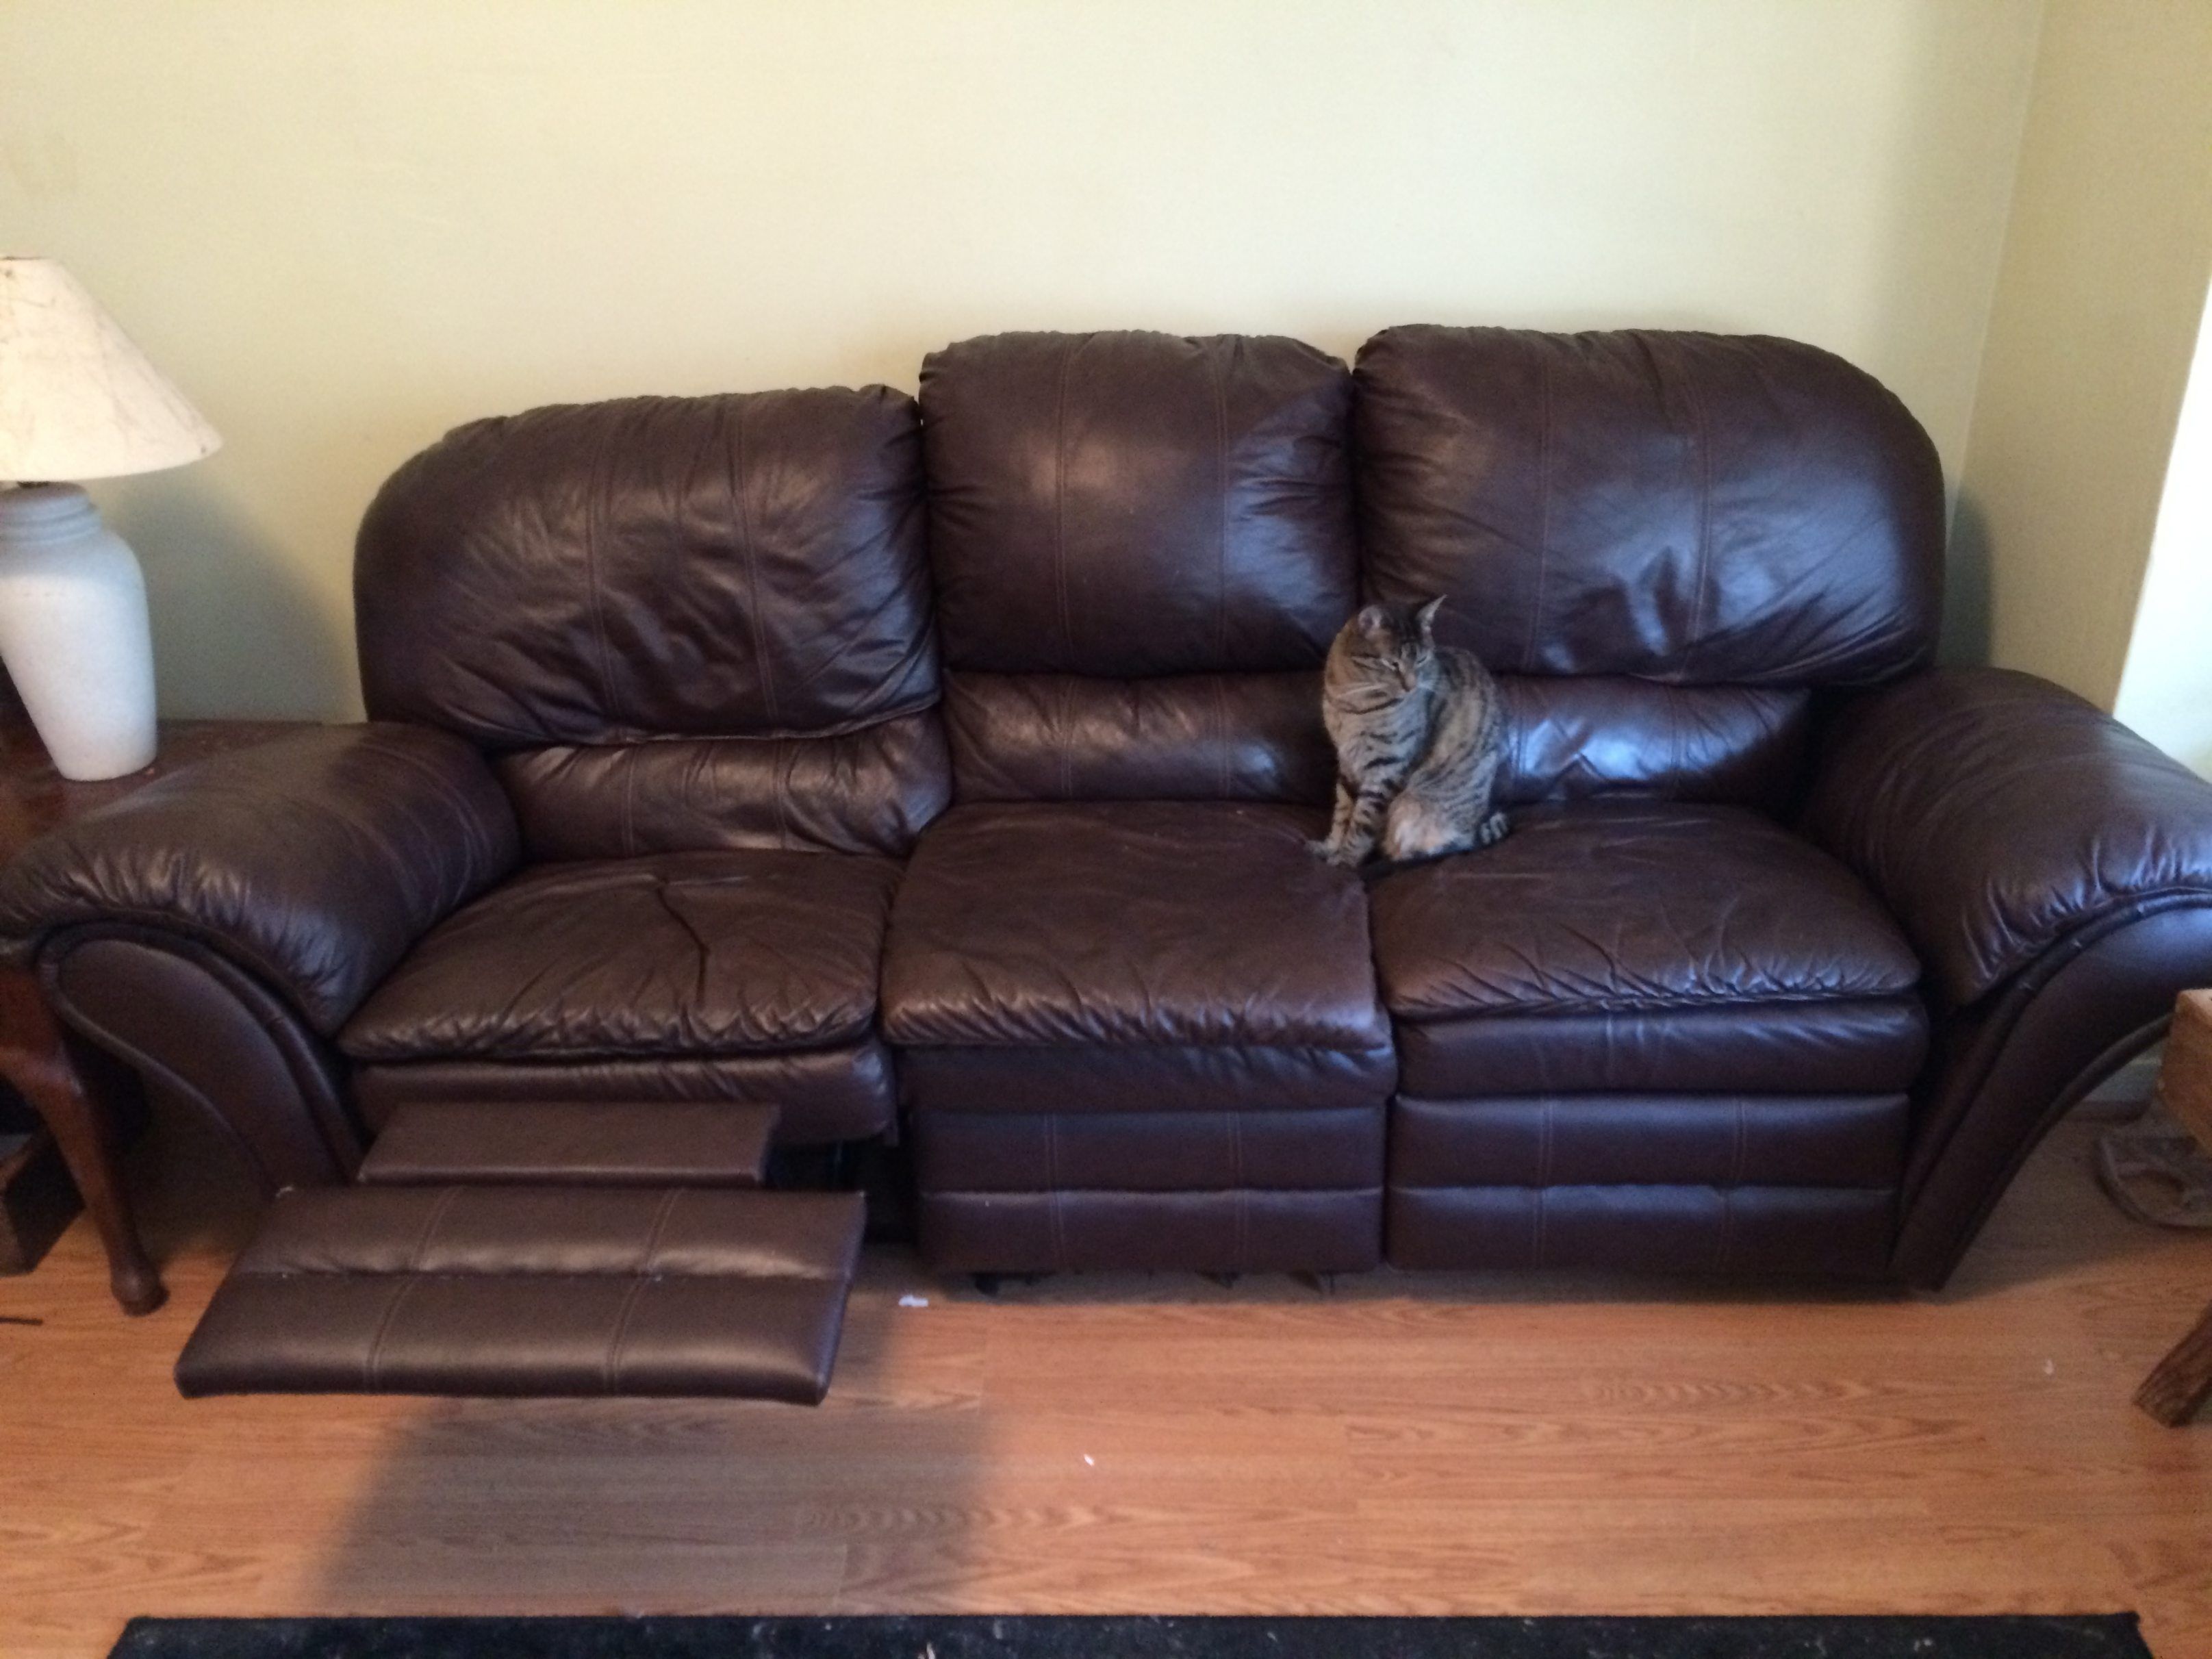 Free Sofa Craigslist #5 Awesome Leather Couch Craigslist 86 In Sofas Intended For Craigslist Leather Sofas (View 7 of 10)